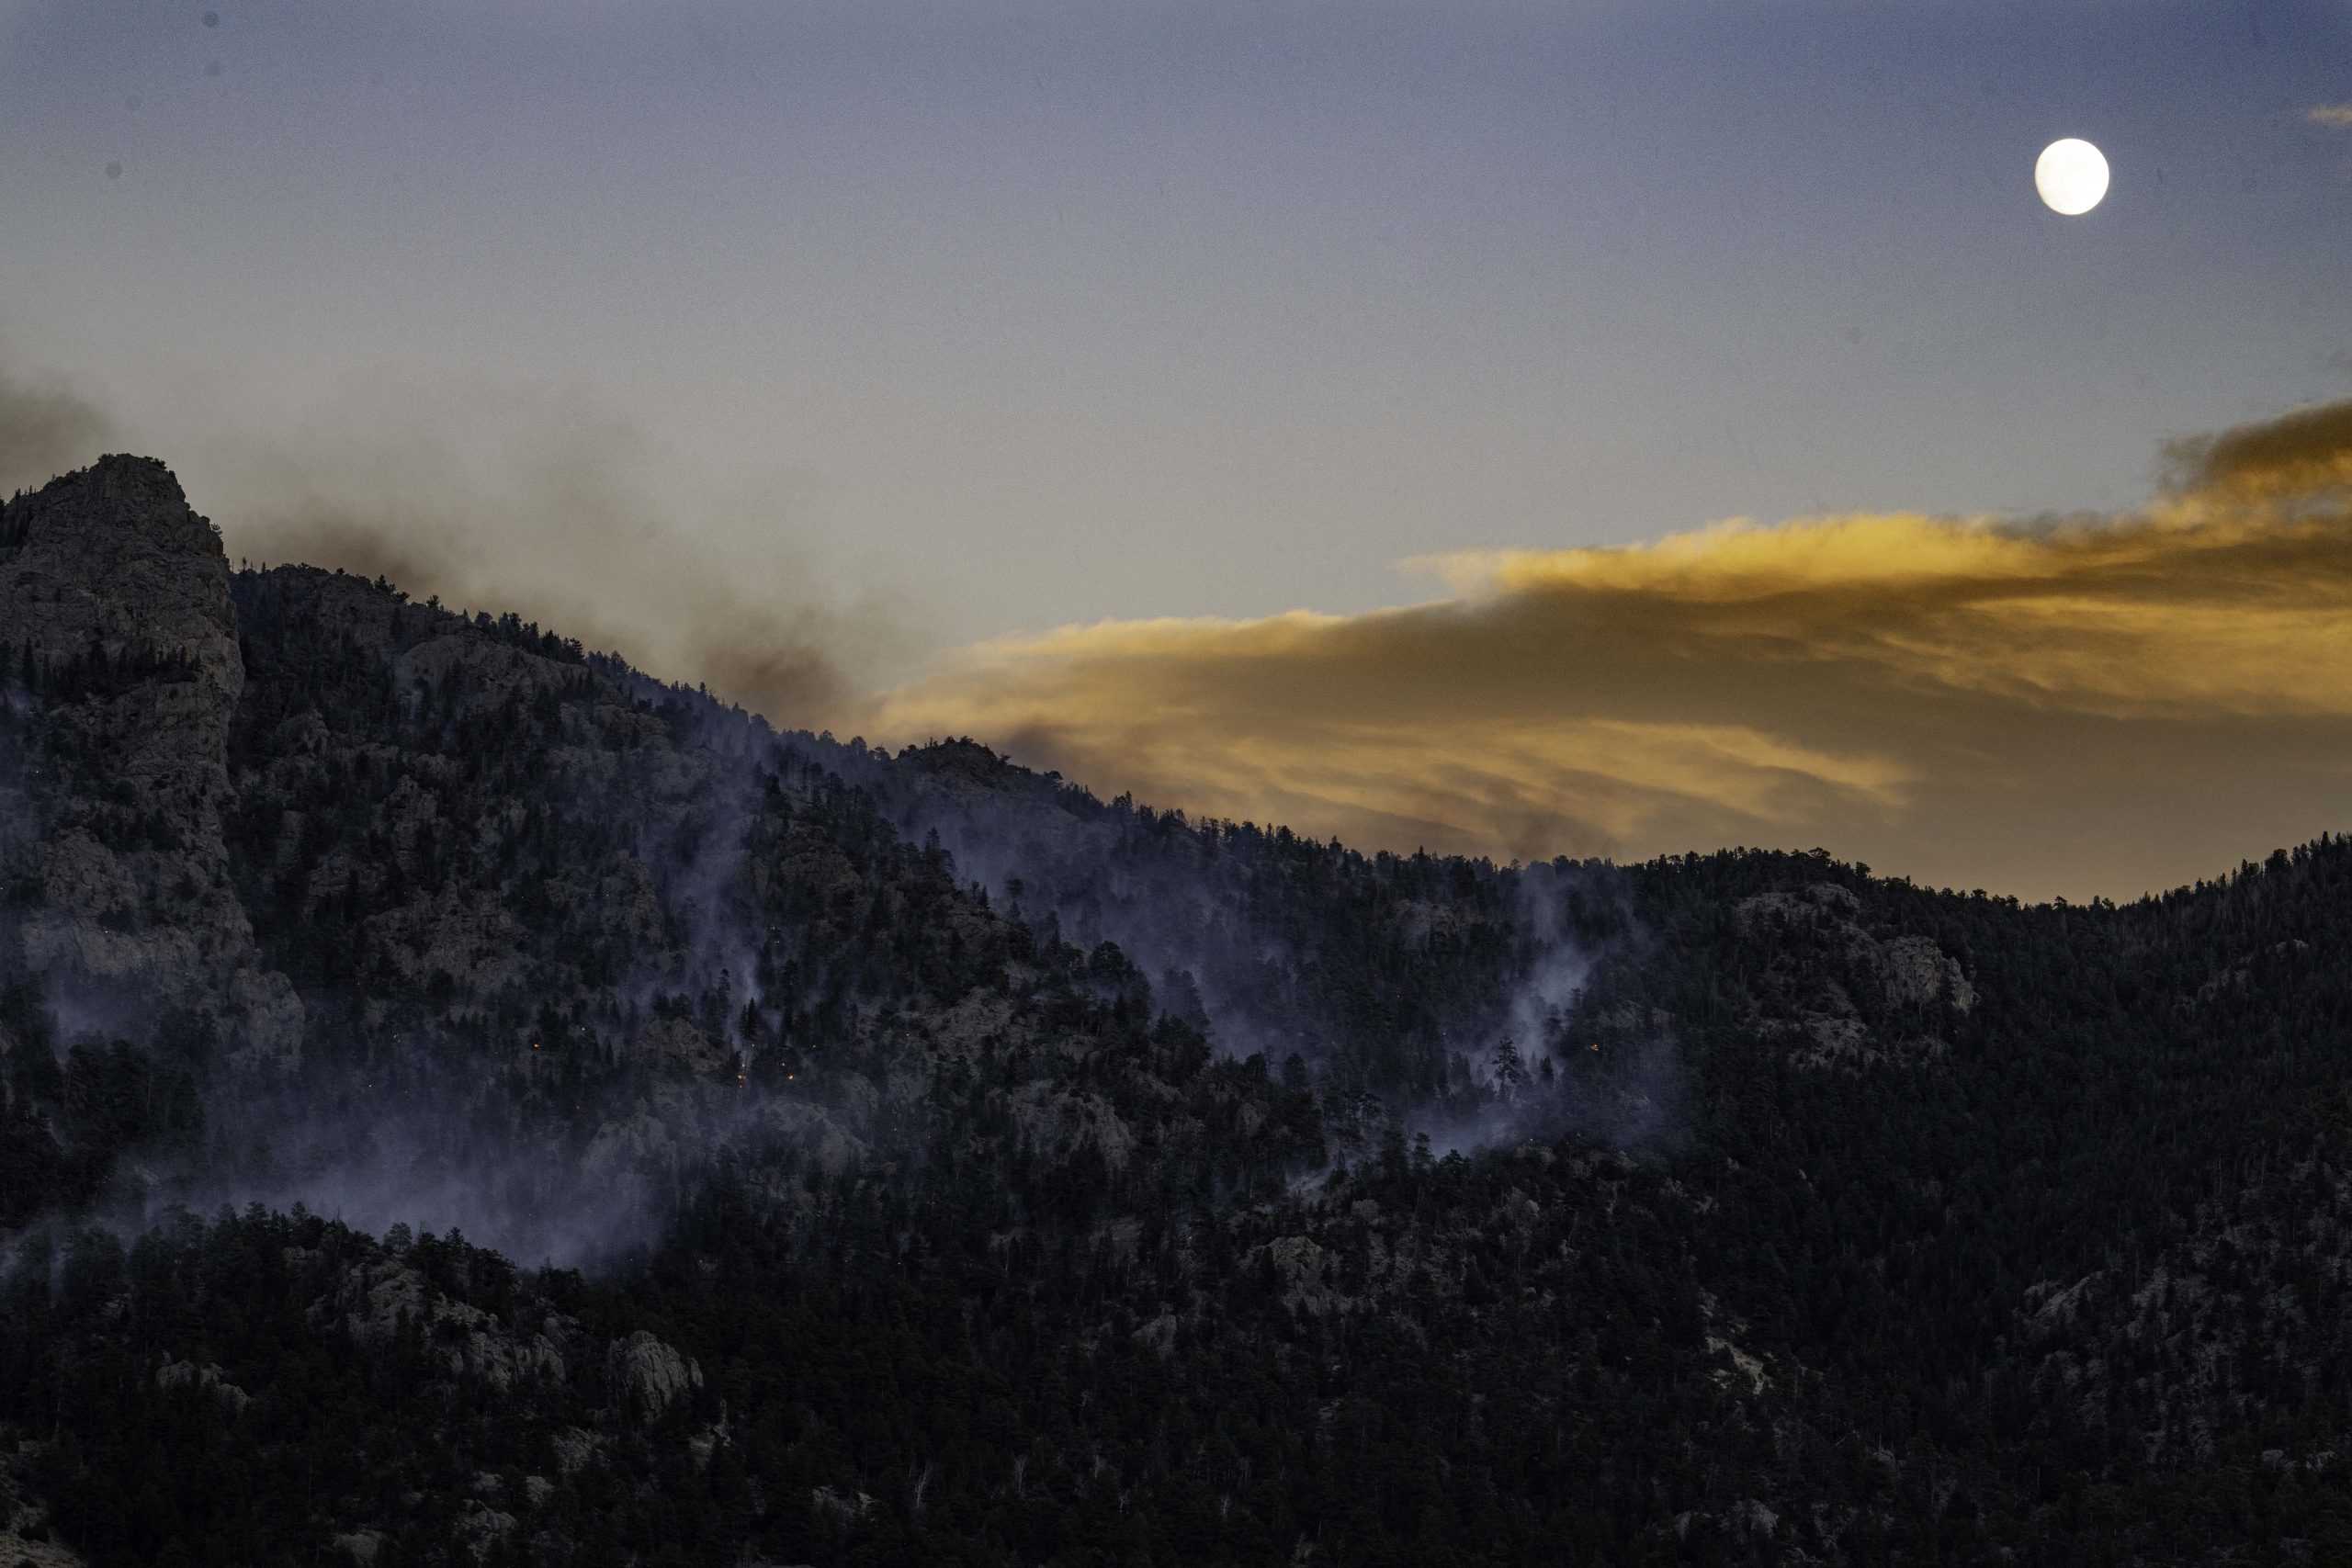 The Kruger Rock fire burning Southeast of Estes Park Colorado Nov. 16. At the time of the photo the fire was approimatley 15% contained spreading across approximatley 115 acres. (Garrett Mogel | The Collegian)